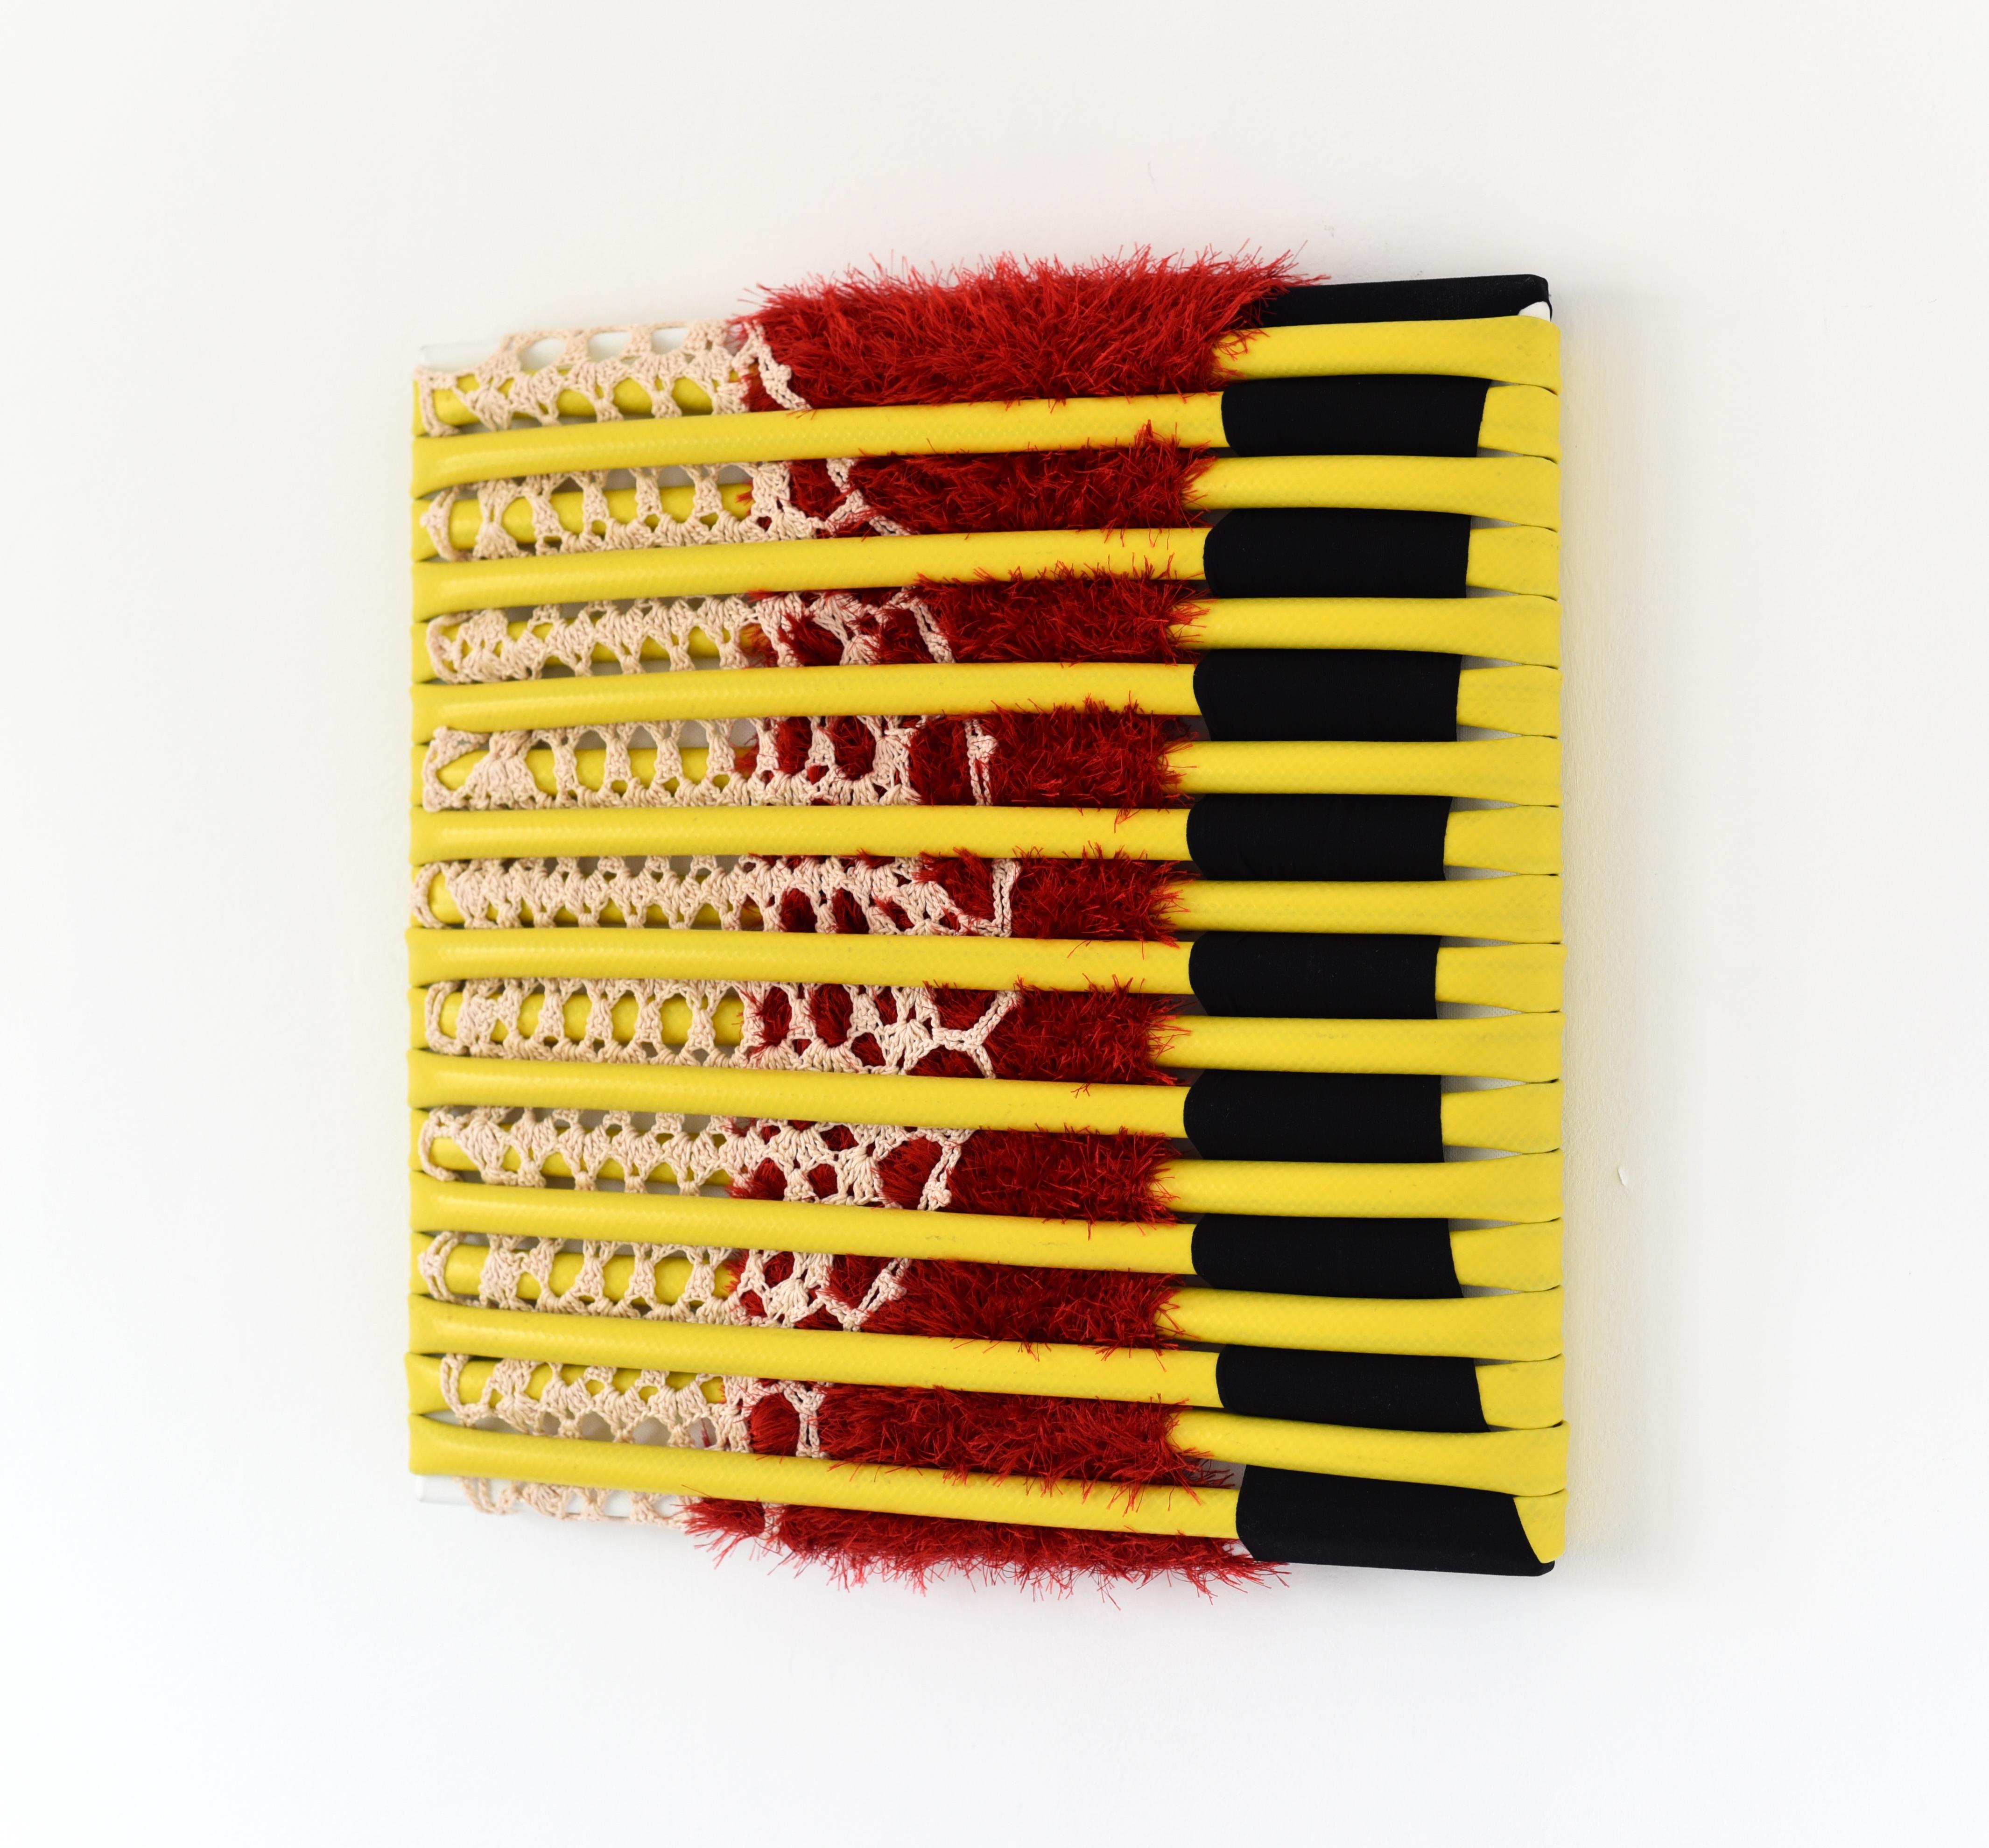 Untitled 1 (yellow, red, black, fabric wall art, abstract sculpture, stripes) - Contemporary Sculpture by Anna-Lena Sauer